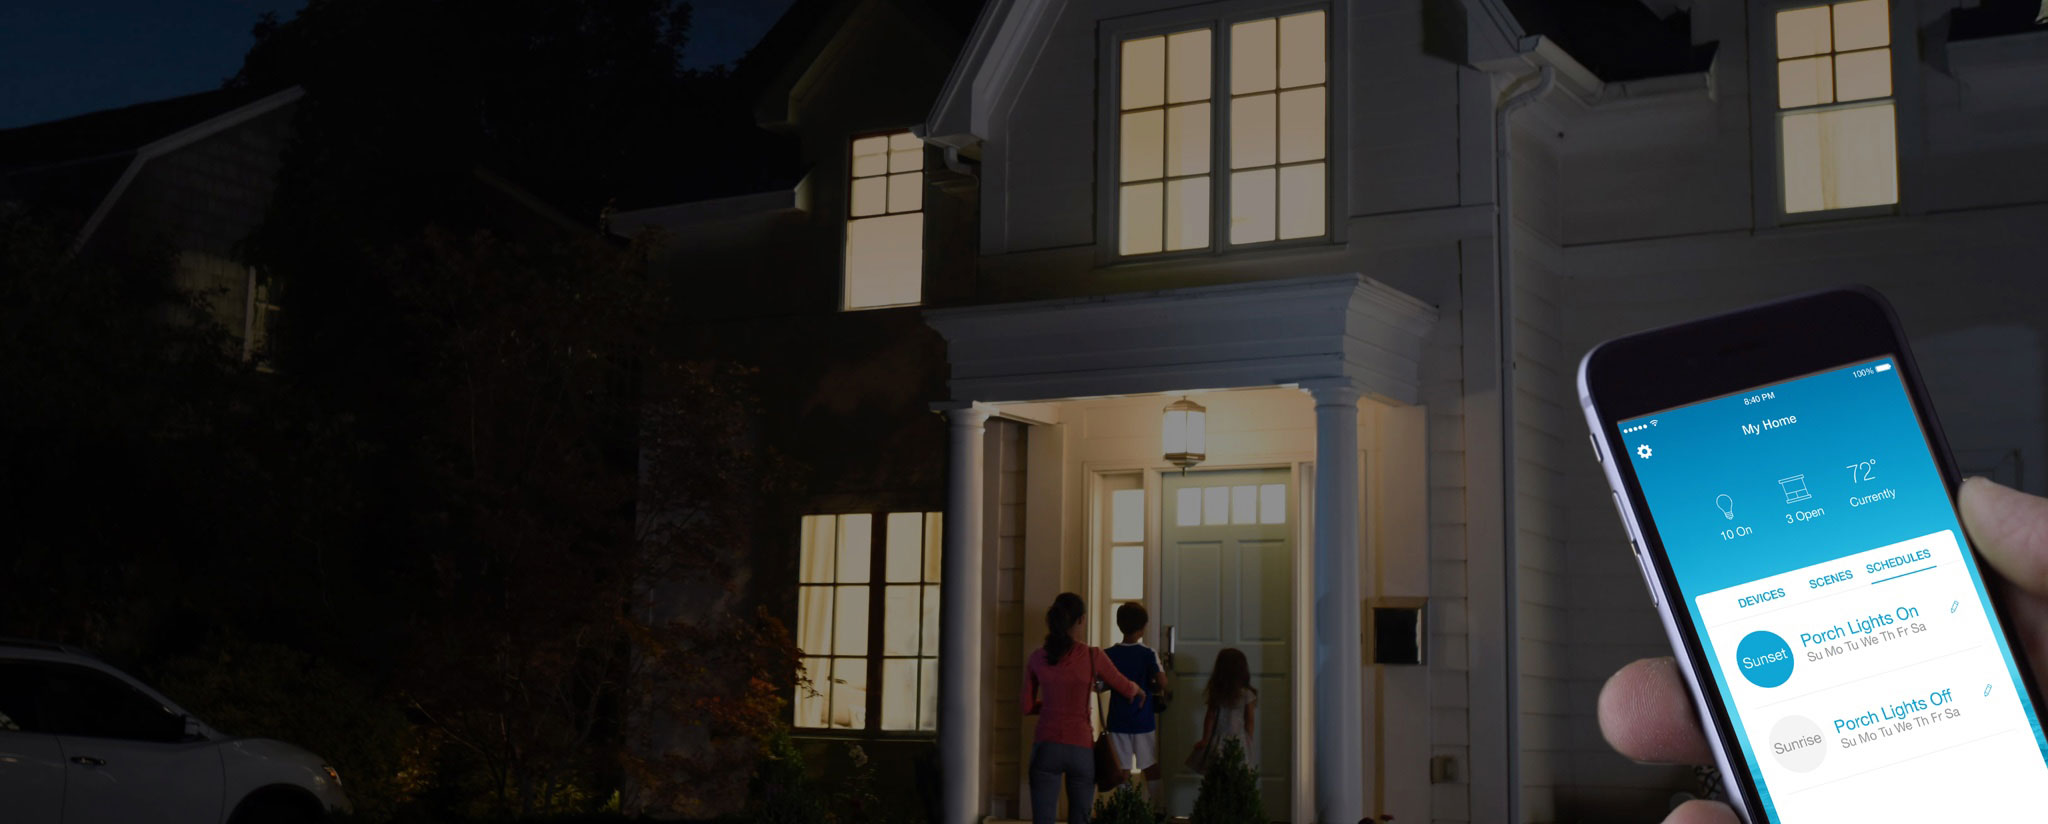 Install smart light switch app on phone, family entering front door in background